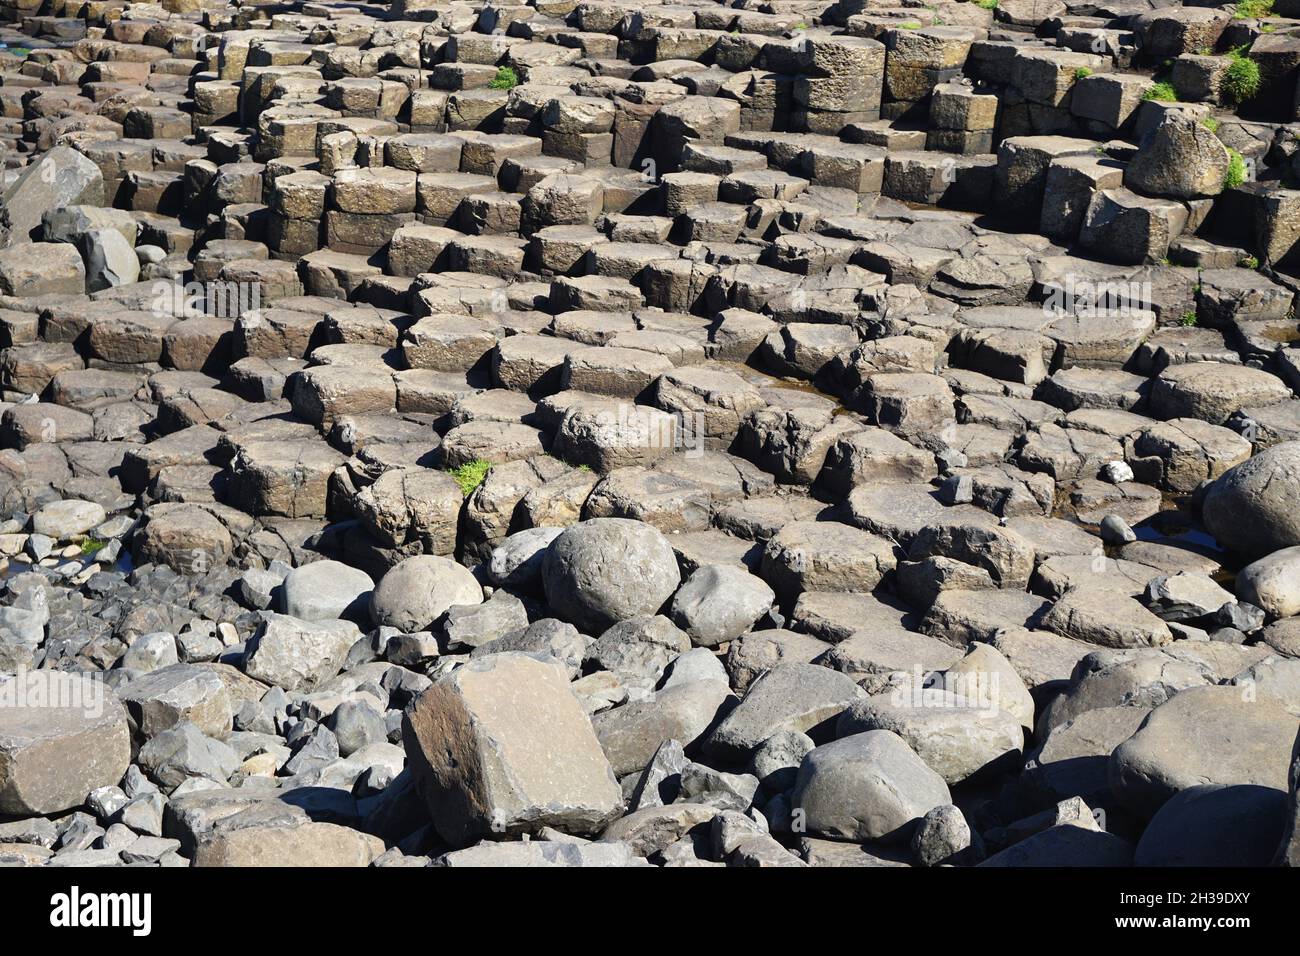 Wide view of natural volcanic rock formations with interlocking shapes at the Giant’s Causeway, in County Antrim on the coast of Northern Ireland Stock Photo